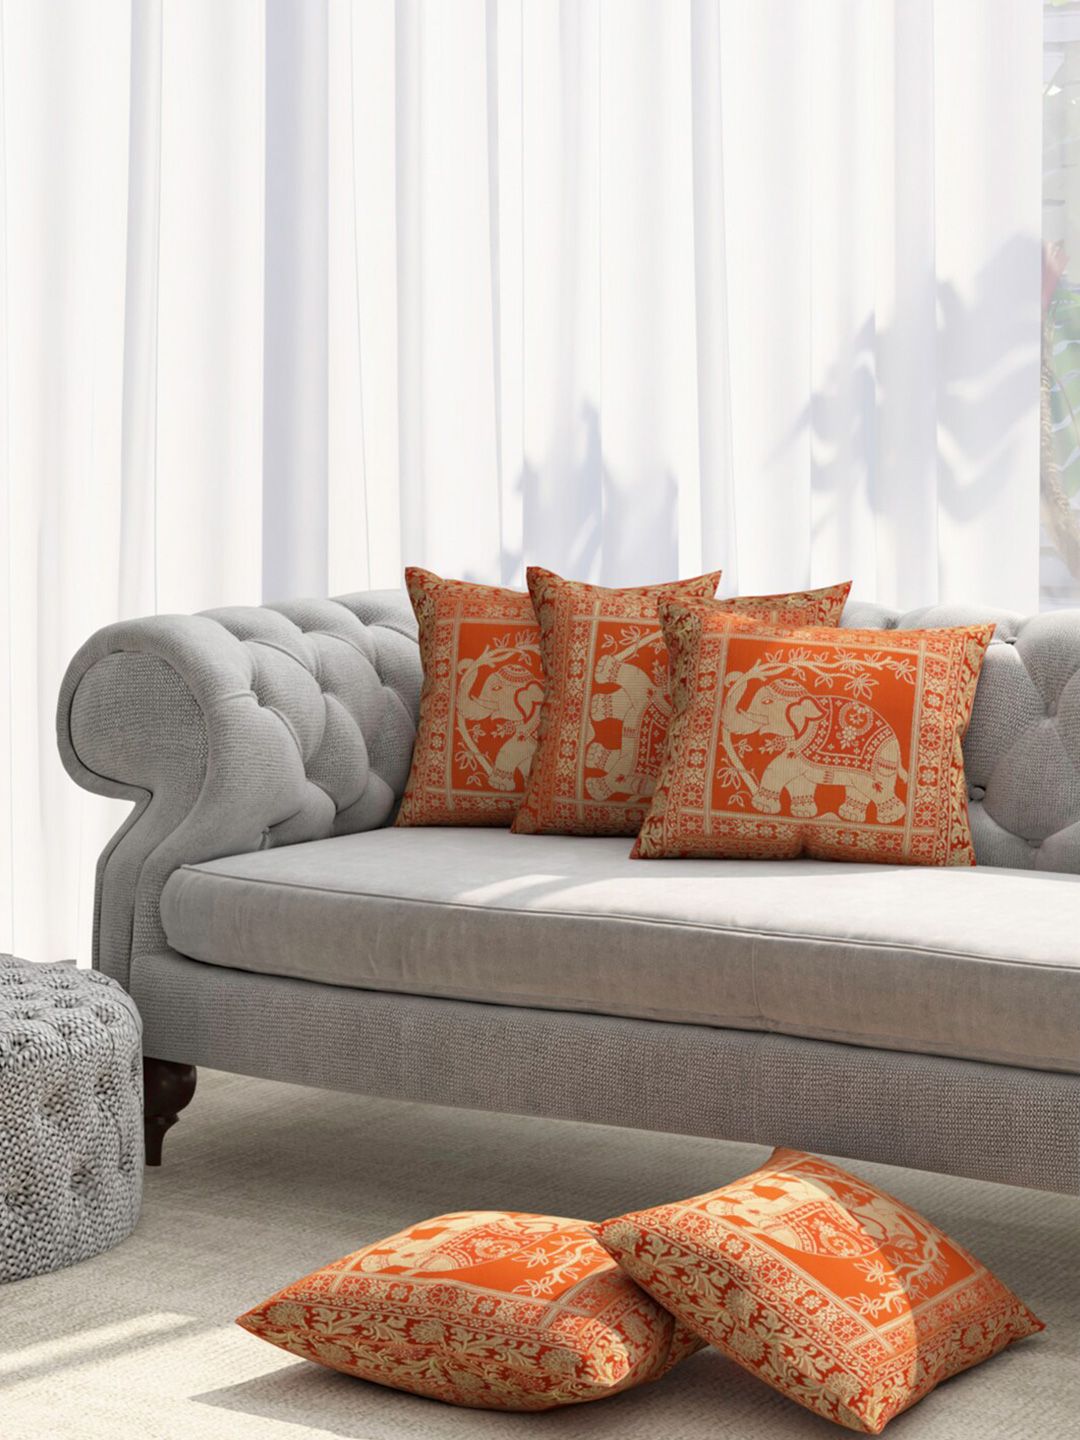 TAG 7 Orange & Gold-Toned Set of 5 Ethnic Motifs Square Cushion Covers Price in India